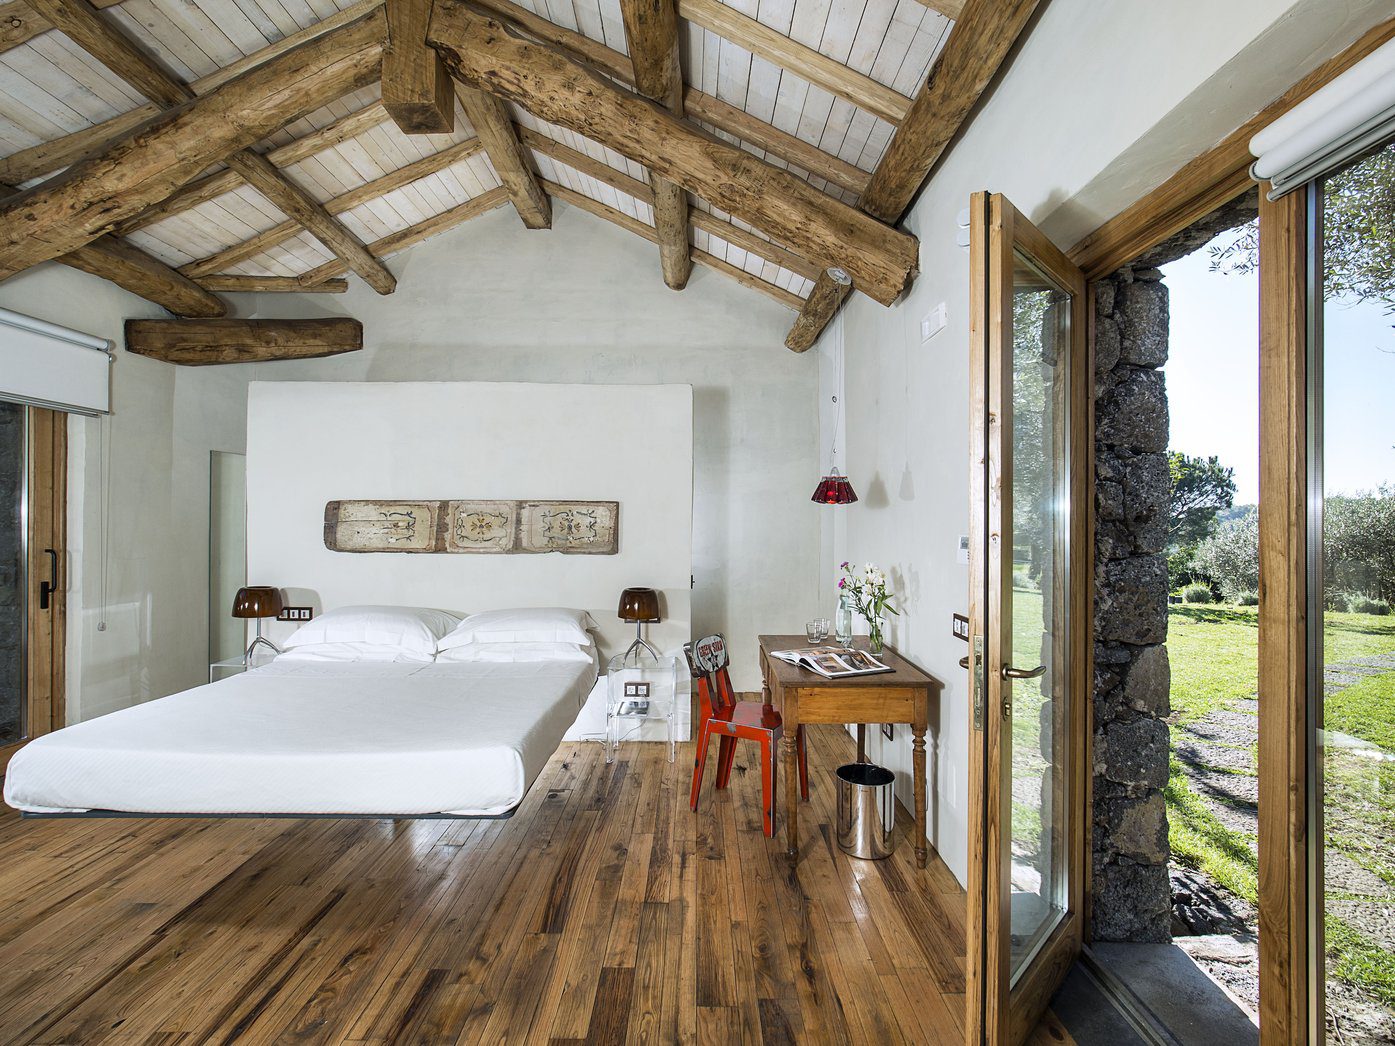 Nest Italy: Country Boutique Hotel & Ville